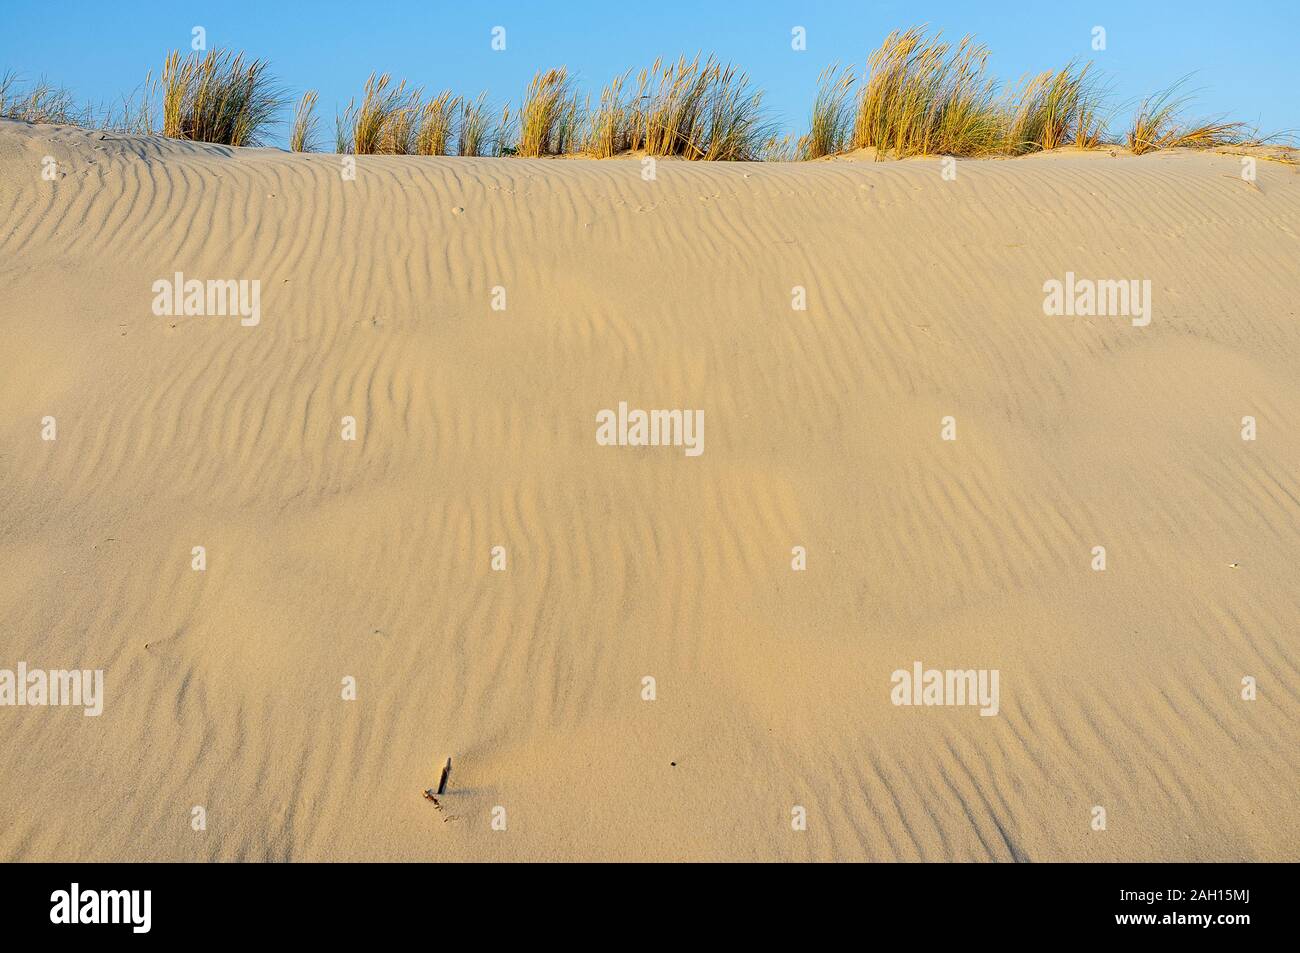 grass and vegetation in sand and dunes against clear blue sky Stock Photo